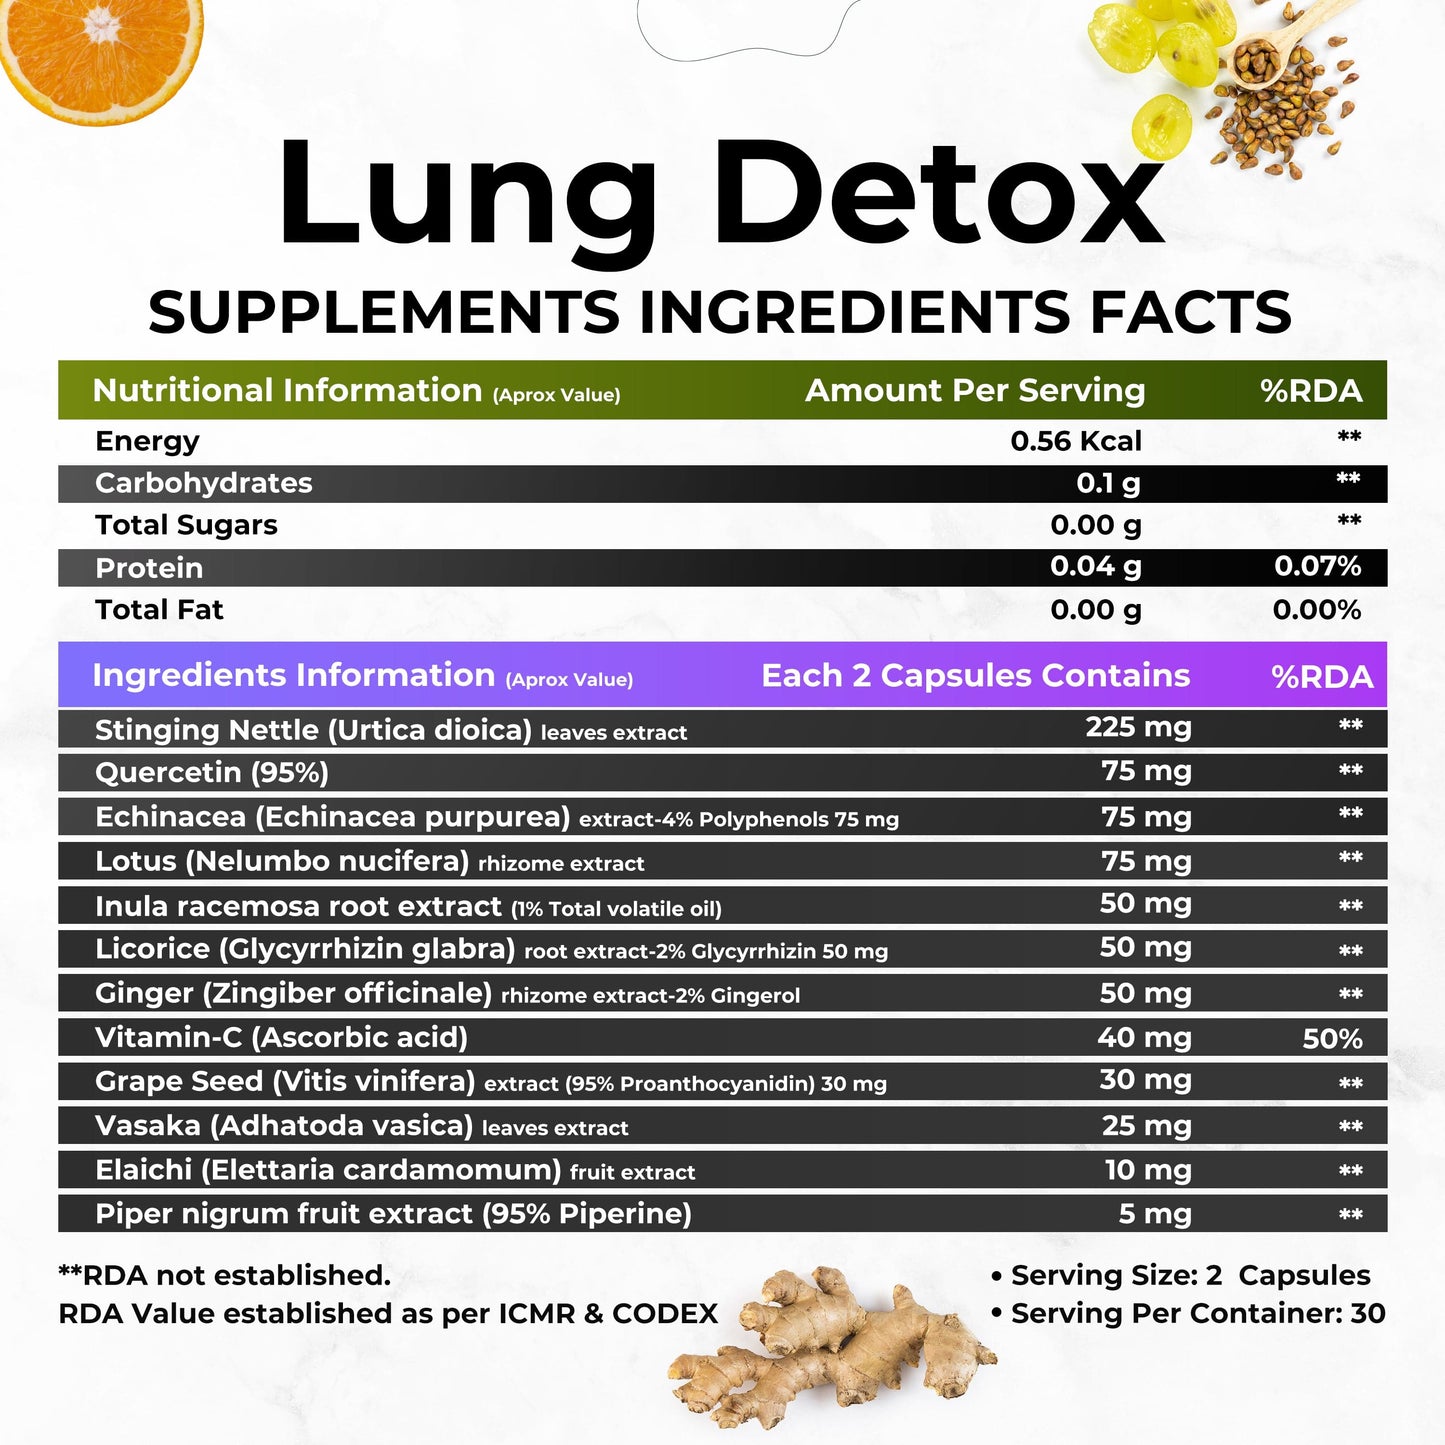 Health Veda Organics Lung Detox with Vitamin C & Grape Seed Extract | 60 Veg Capsules | Supports Healthy Breathing| For Detoxification of Lung & Immunity | For Both Men & Women